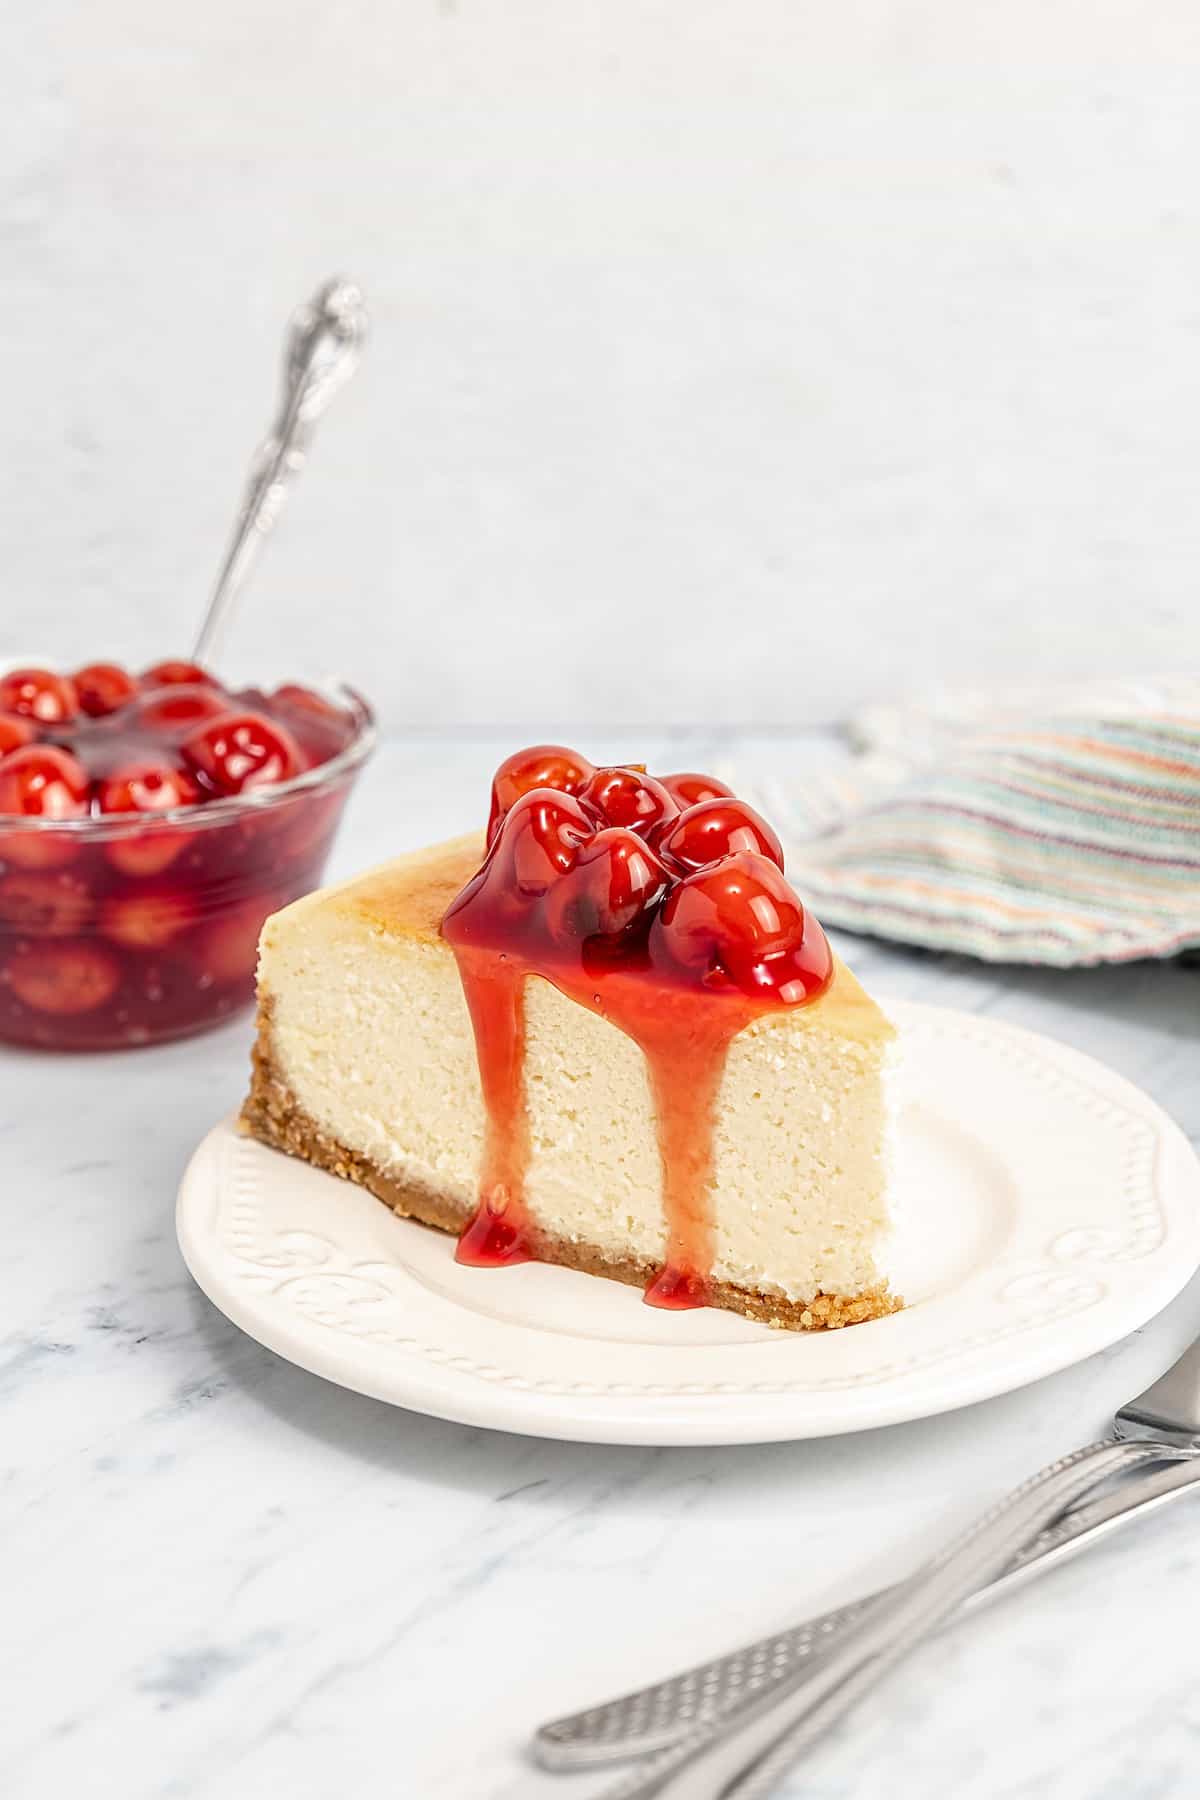 A slice of gluten-free cheesecake topped with cherries on a plate with a bowl of cherries in the background.